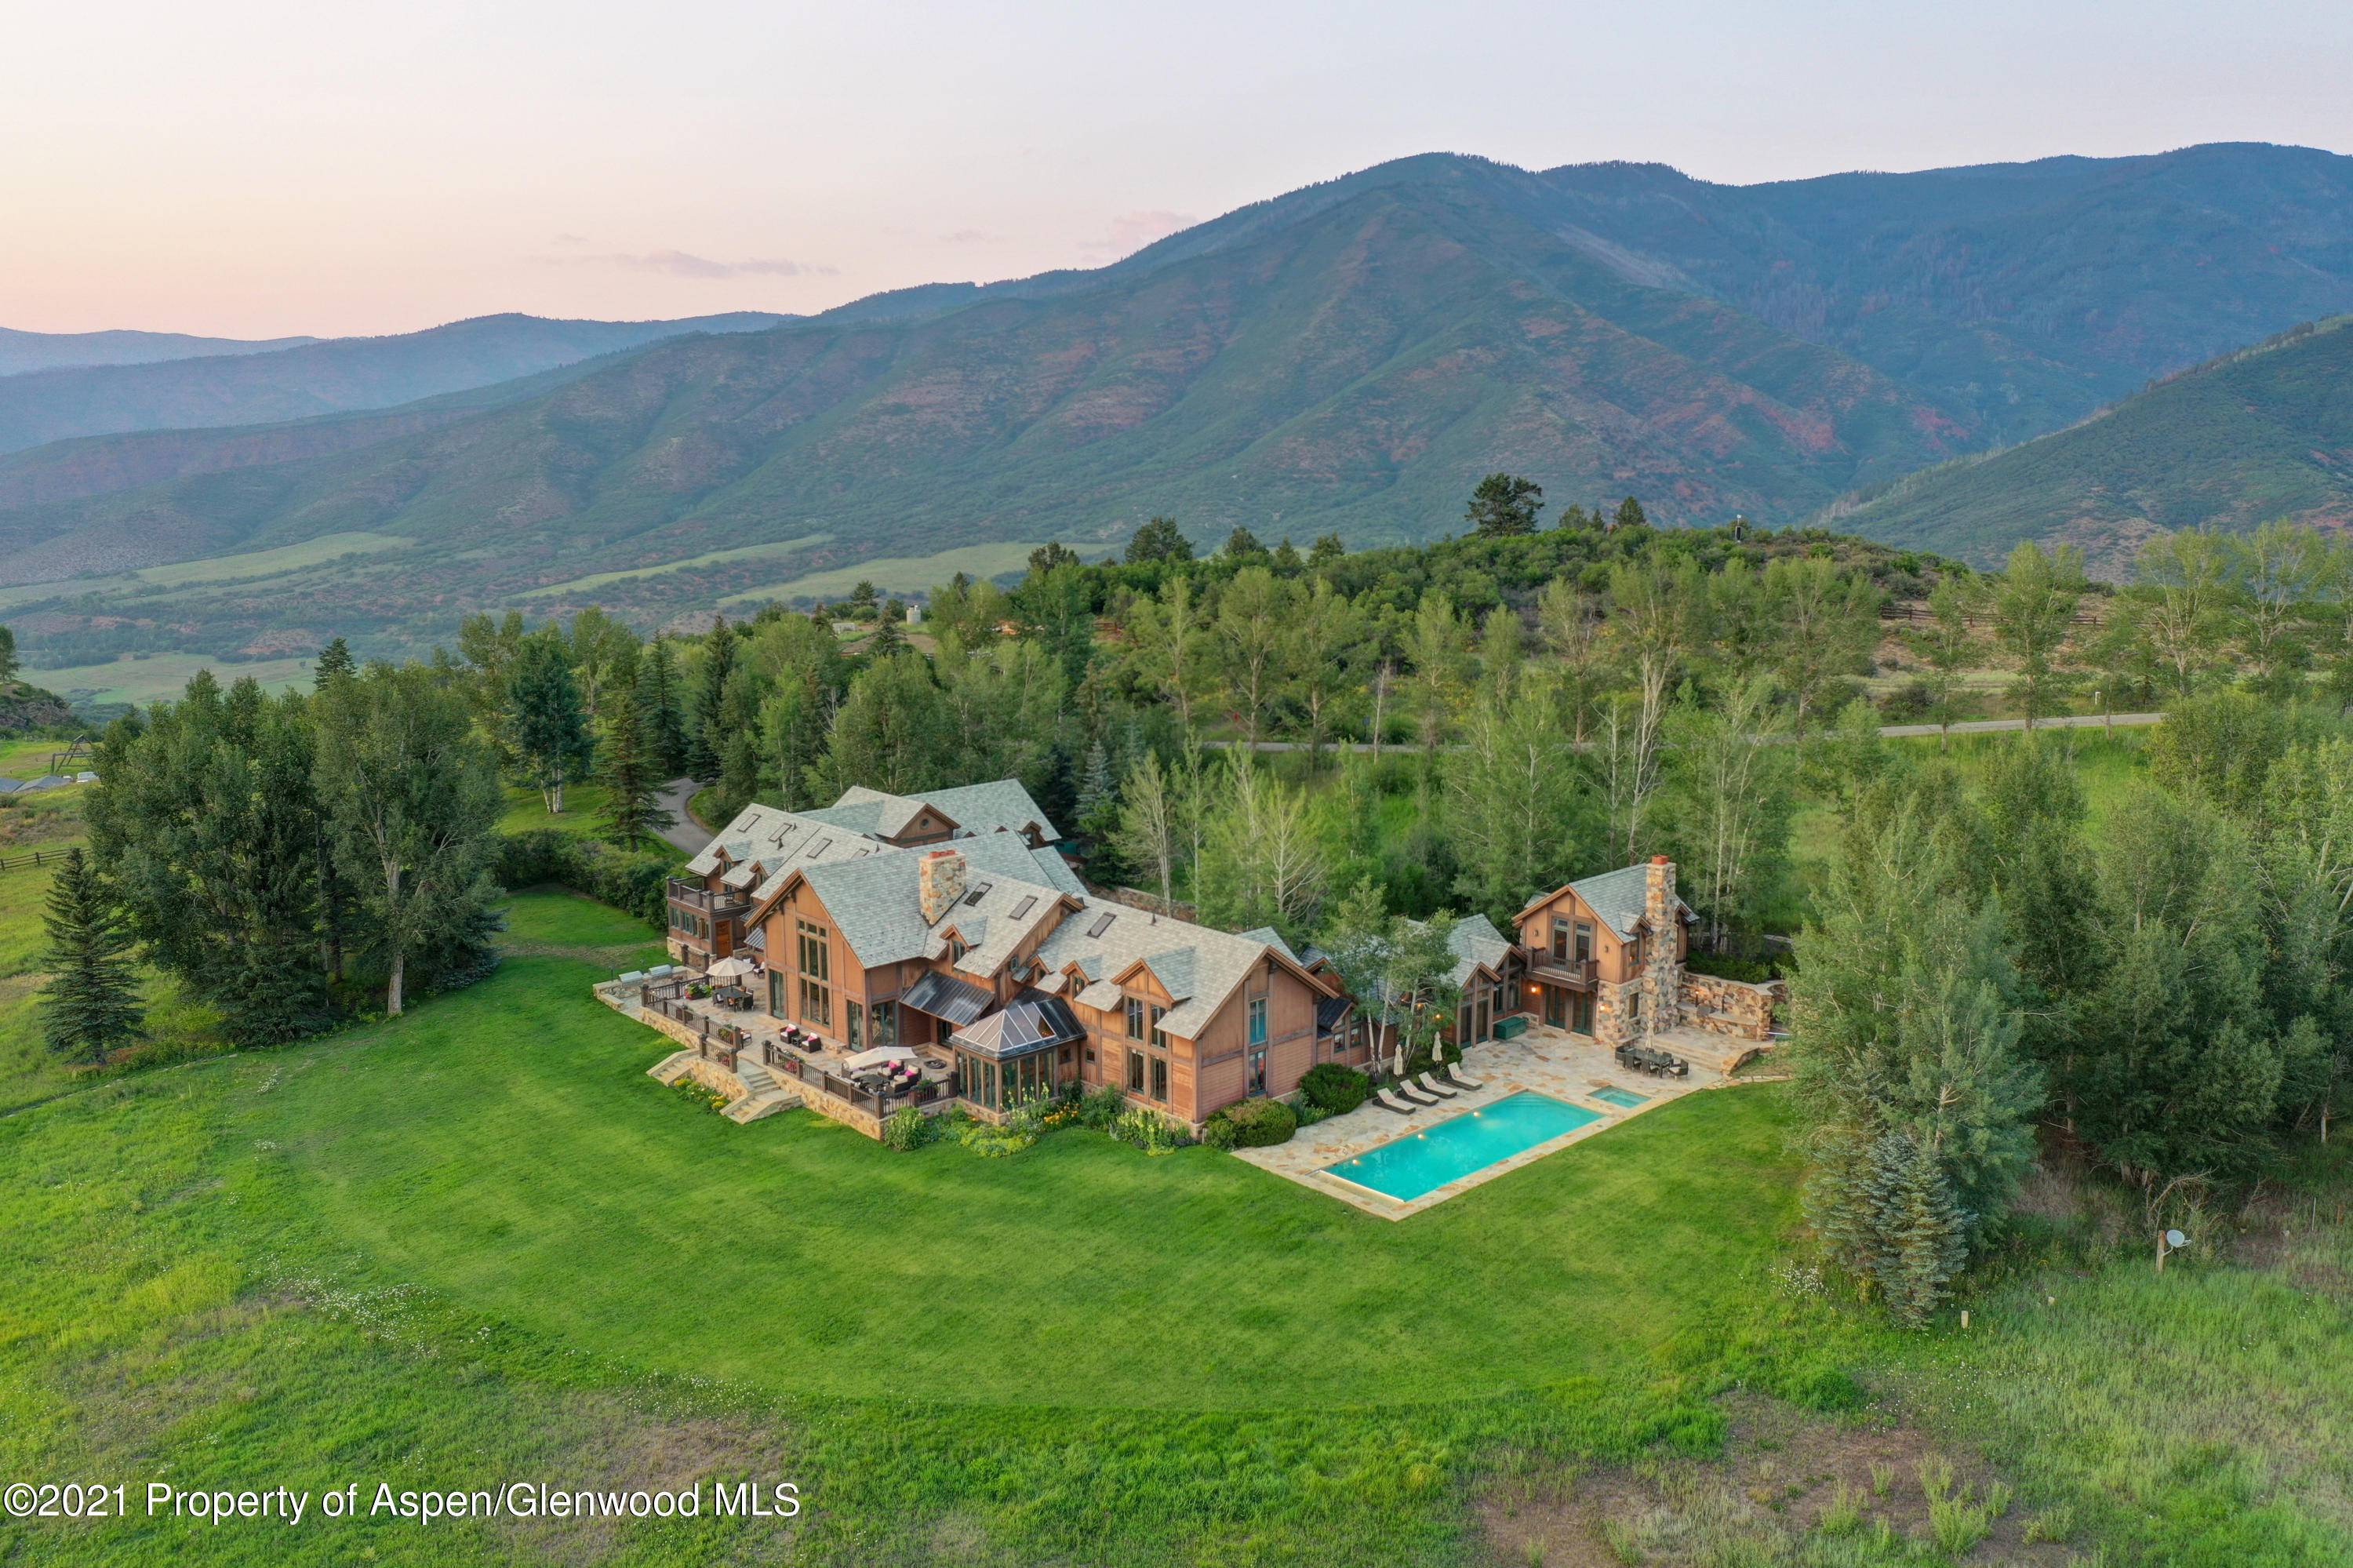 Serenity awaits you at this extraordinary European inspired mountain estate just 12 minutes outside of Aspen in the exclusive Starwood community.